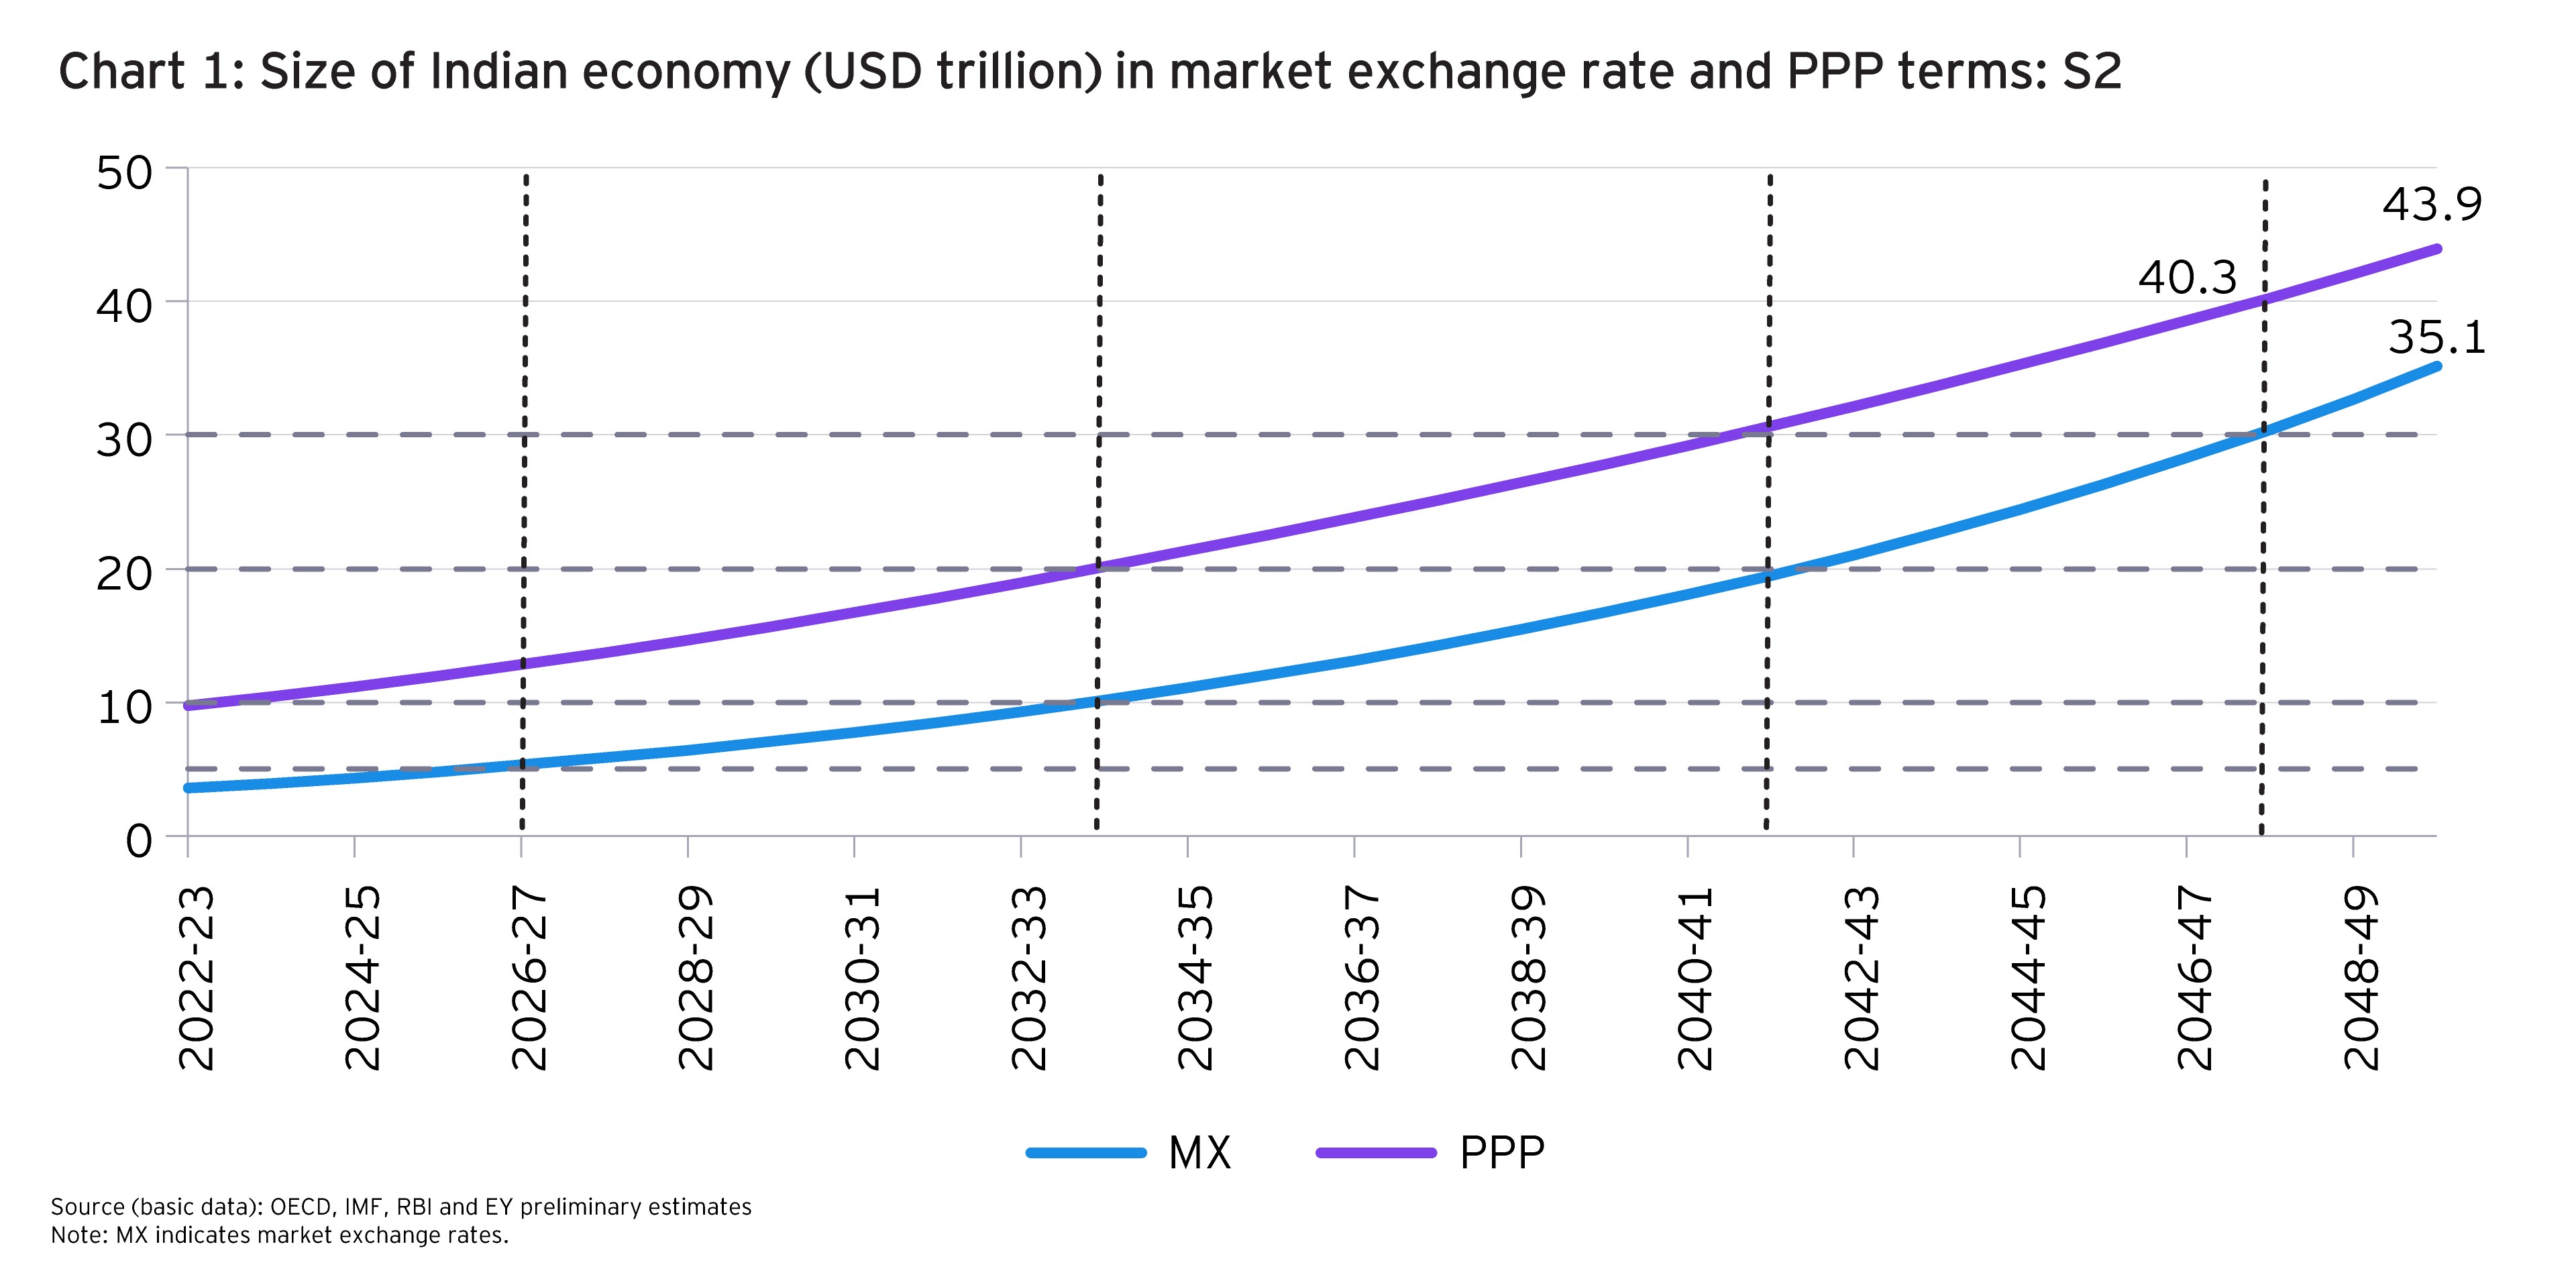 Size of Indian economy (USD trillion) in market exchange rate and PPP terms